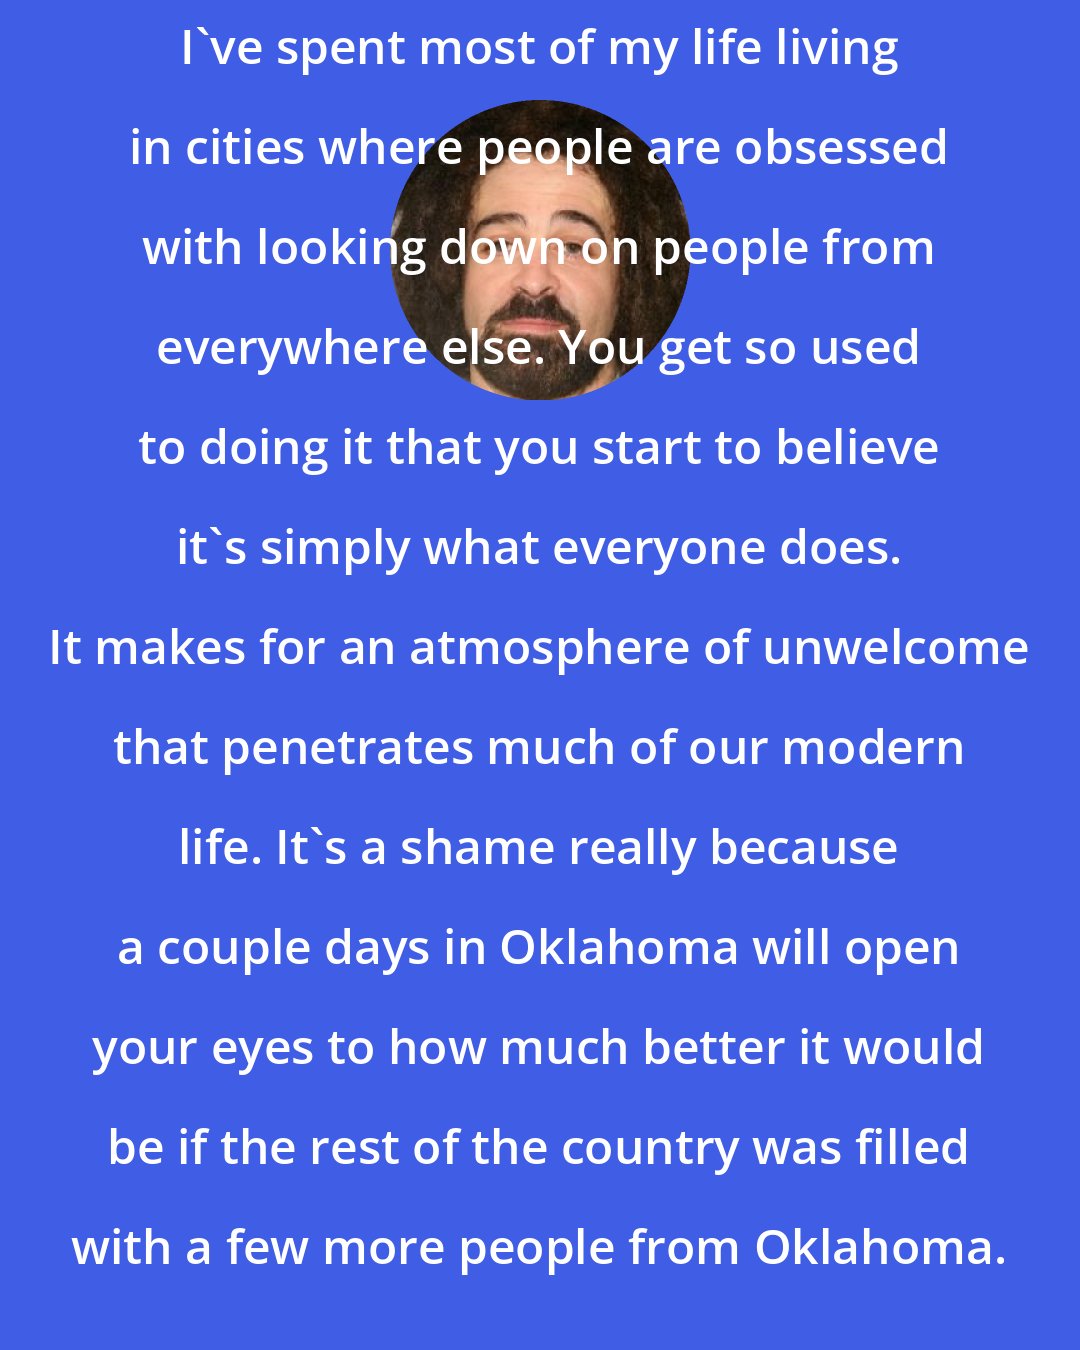 Adam Duritz: I've spent most of my life living in cities where people are obsessed with looking down on people from everywhere else. You get so used to doing it that you start to believe it's simply what everyone does. It makes for an atmosphere of unwelcome that penetrates much of our modern life. It's a shame really because a couple days in Oklahoma will open your eyes to how much better it would be if the rest of the country was filled with a few more people from Oklahoma.